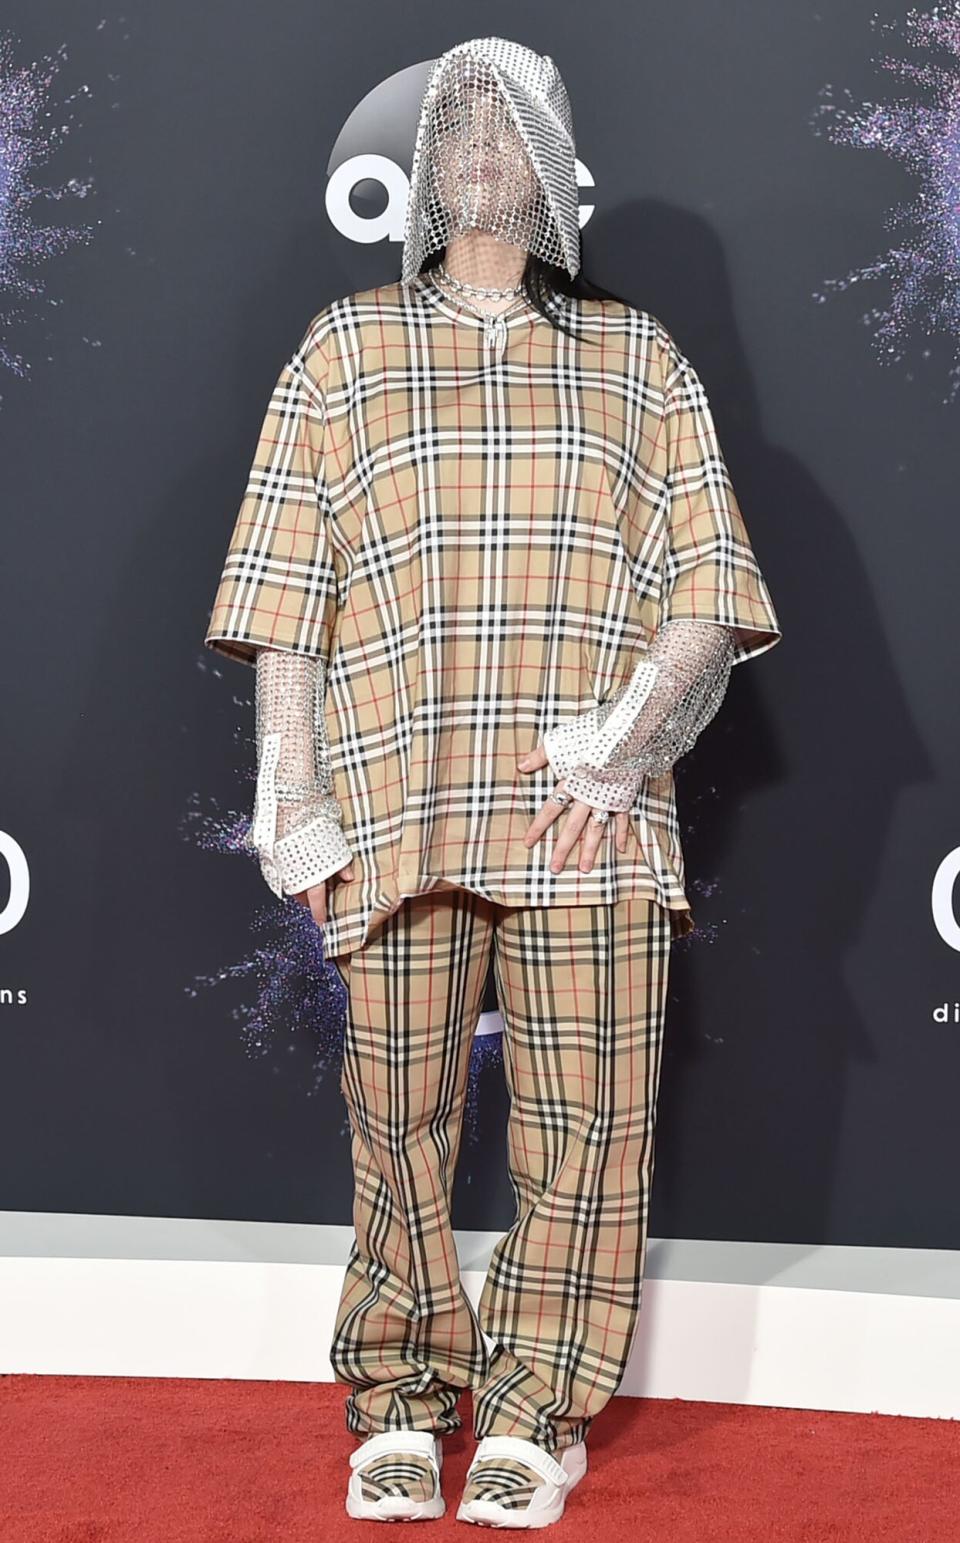 Billie Eilish attends 47th Annual AMA Awards - Arrivals at Microsoft Theater on November 24, 2019 in New York City